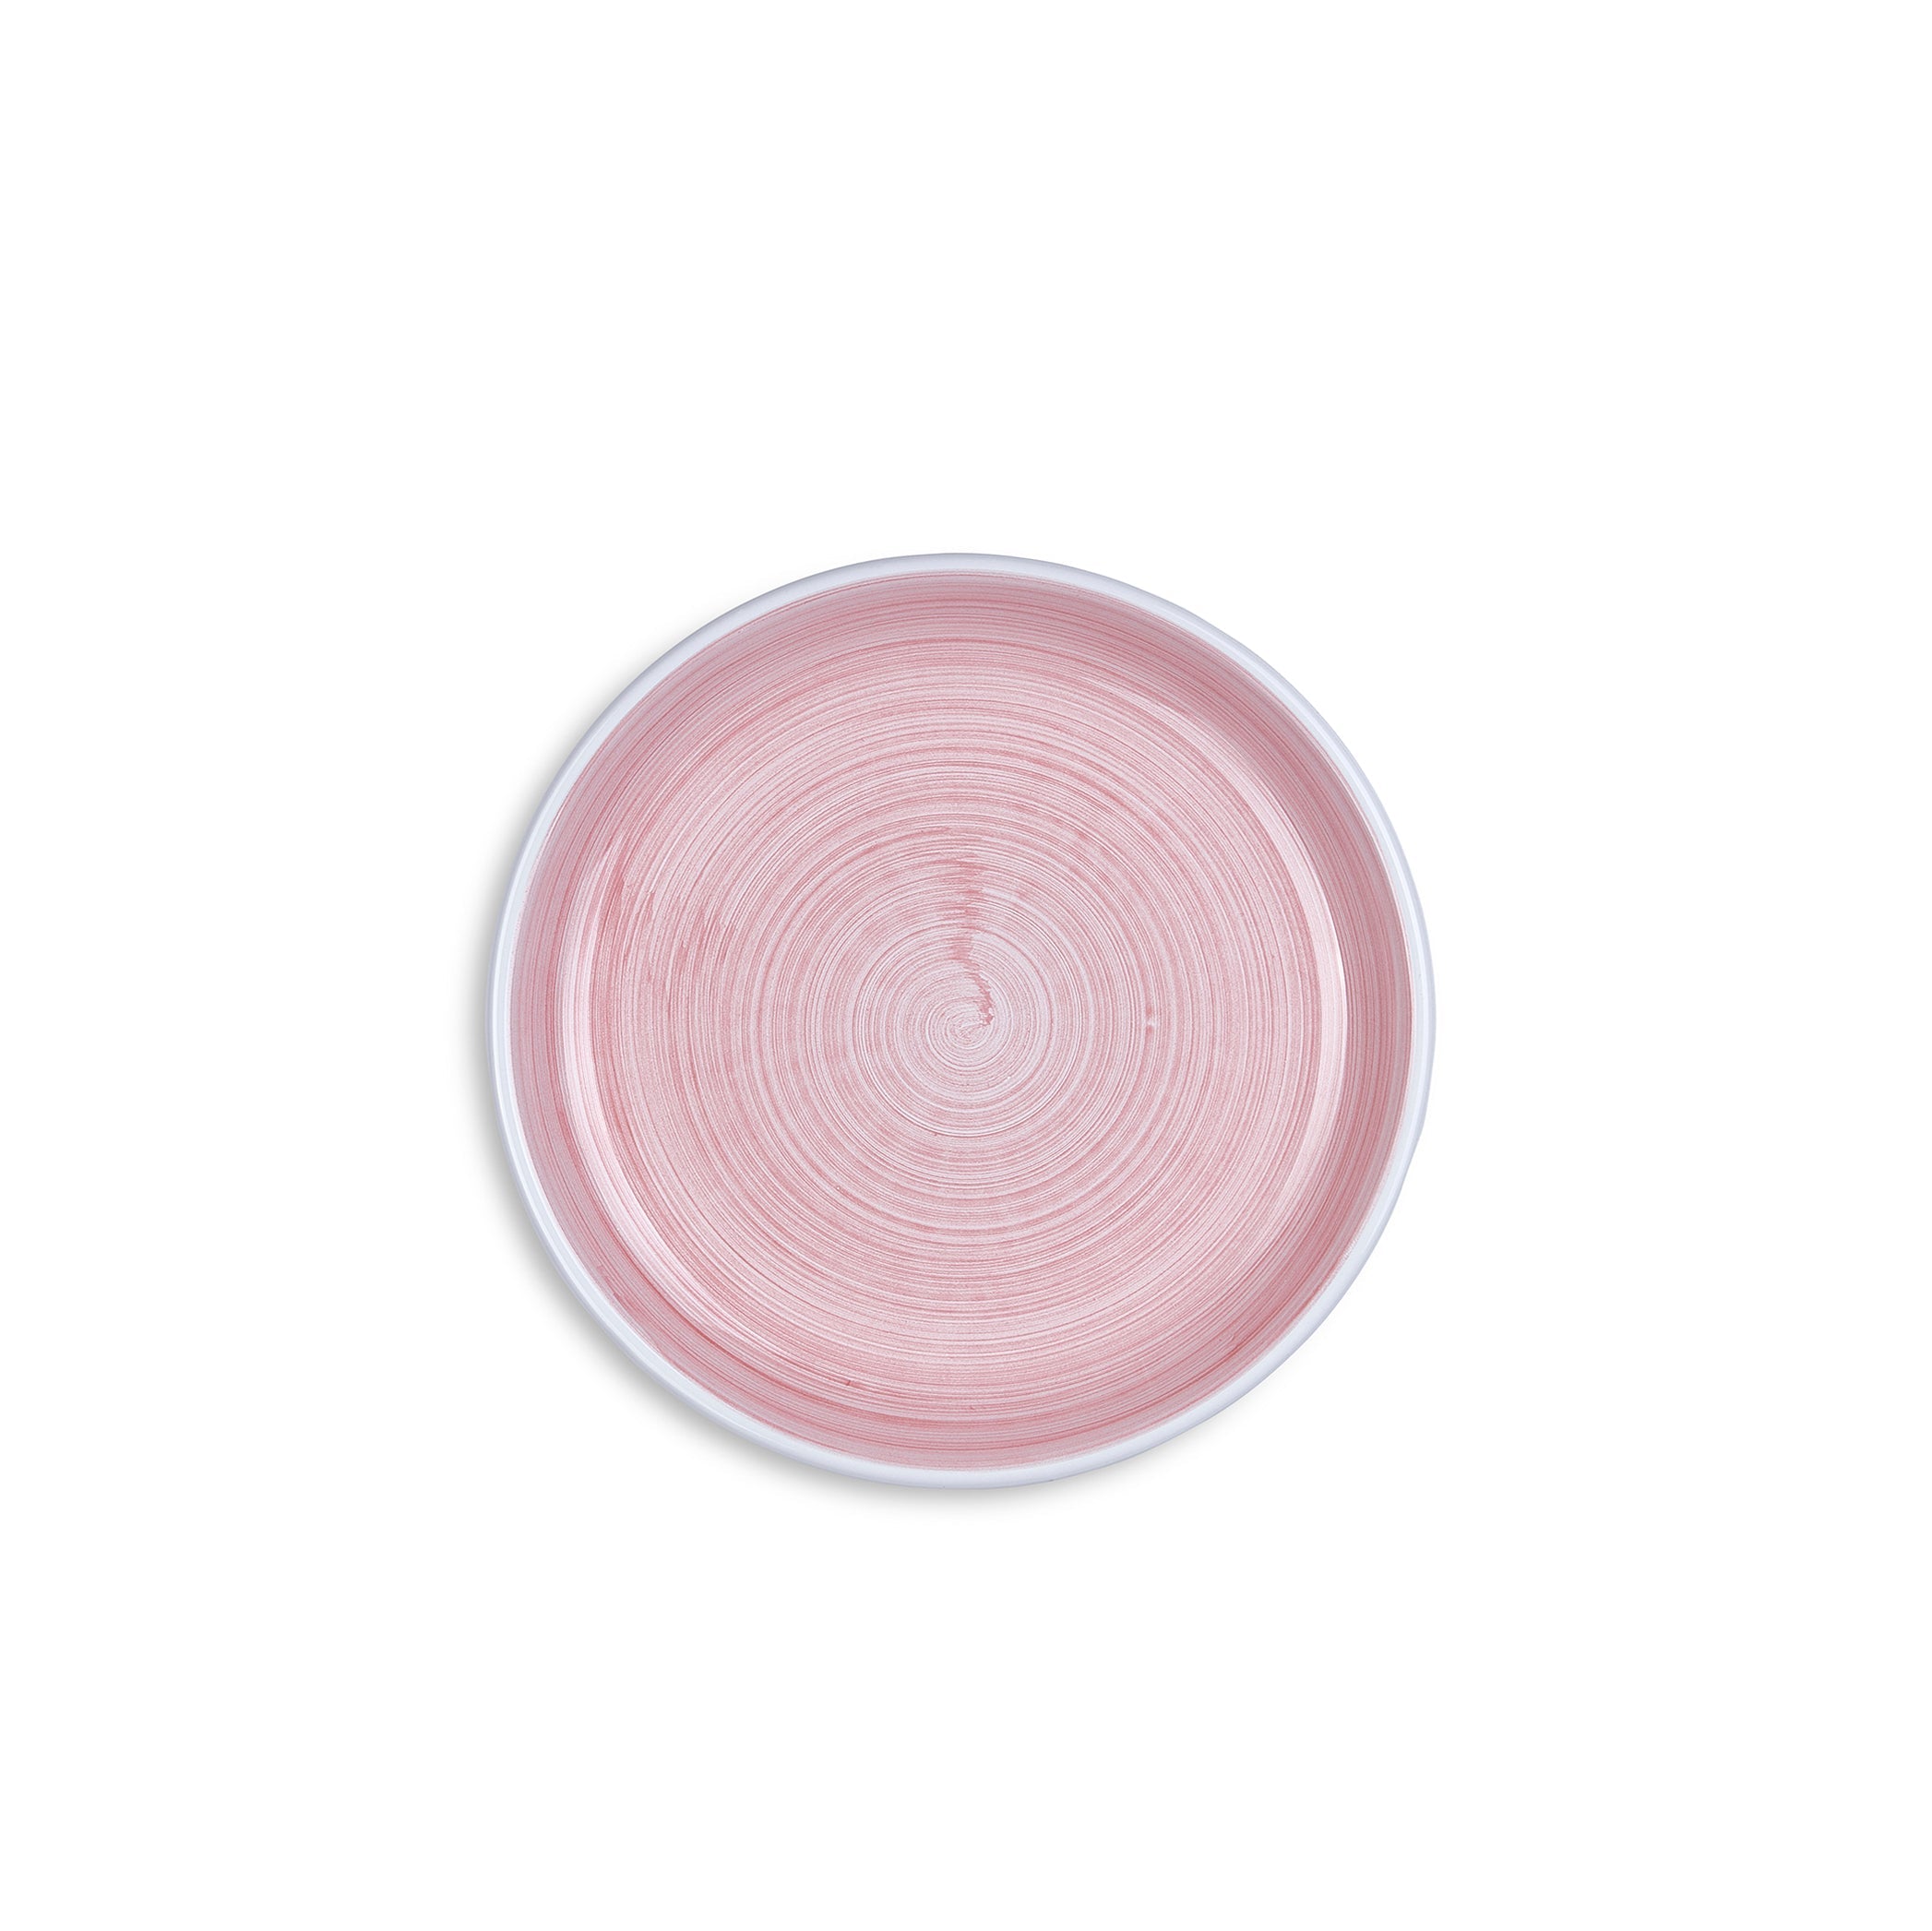 S&B 'Brushed' Ceramic Side Plate in Pastel Pink, 21cm